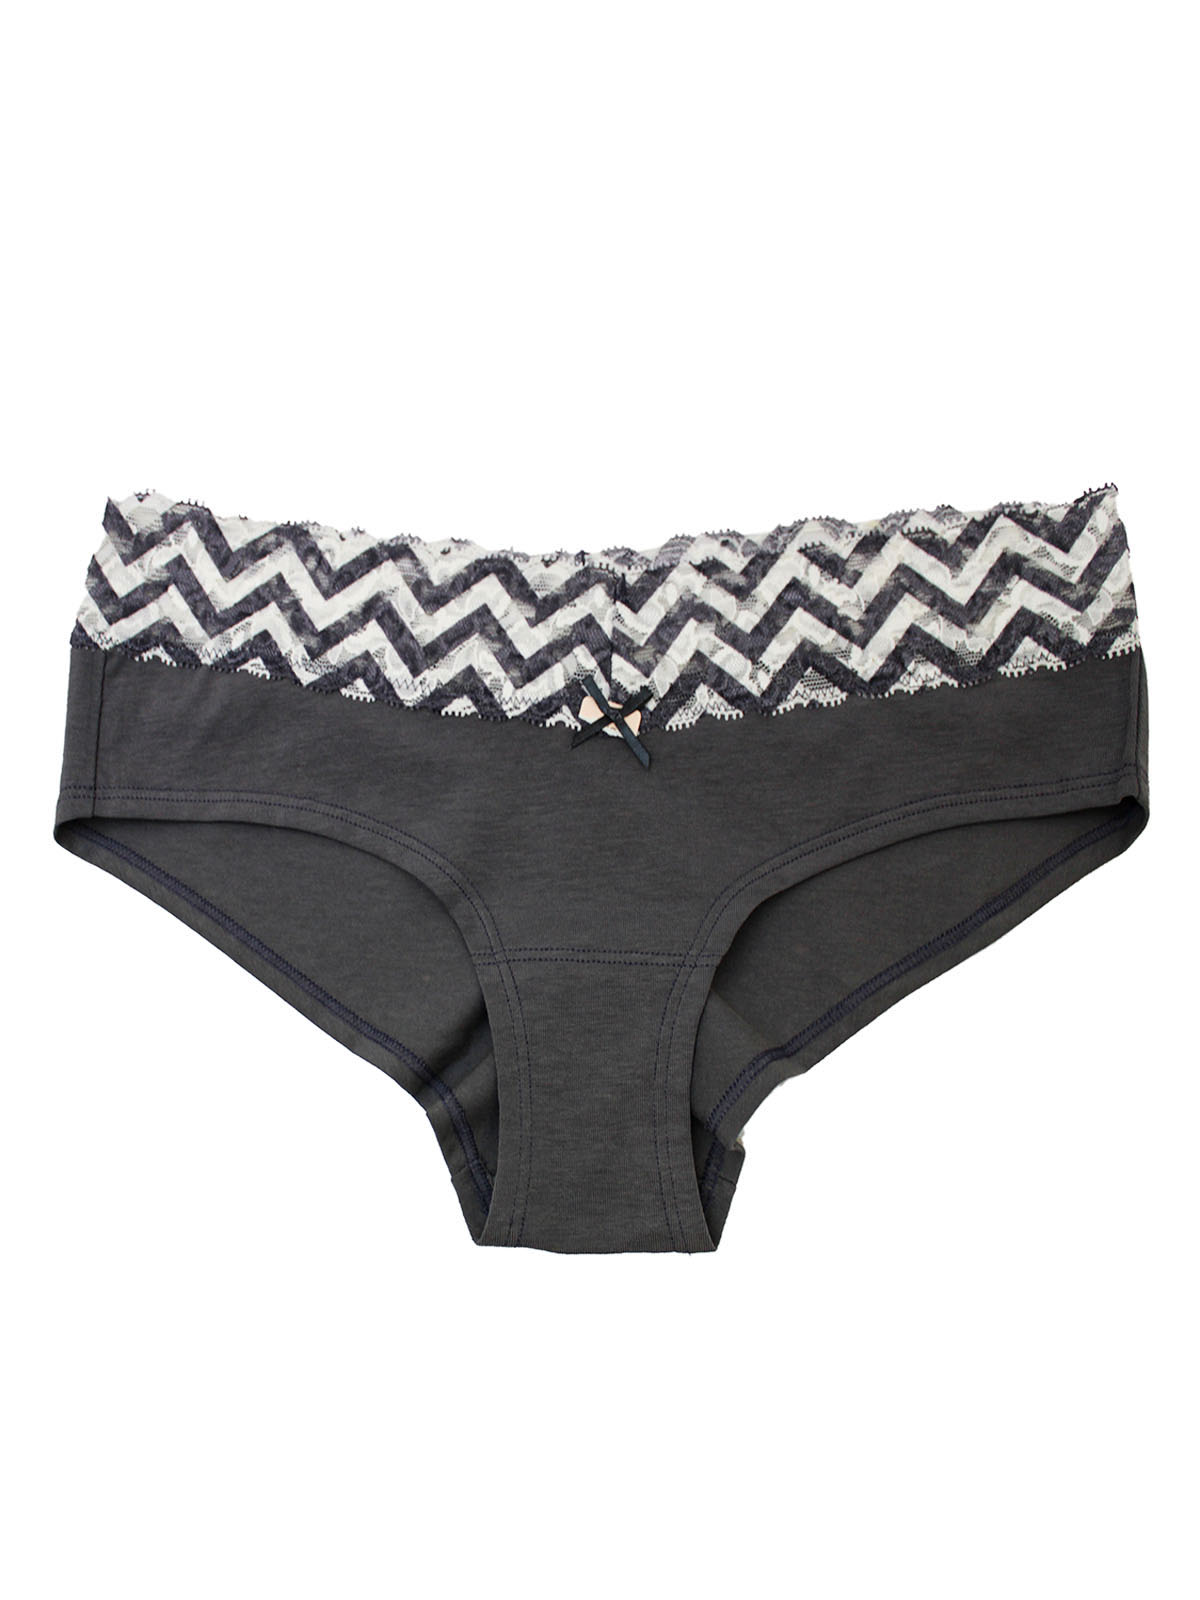 PRIMARK SECRET POSSESSIONS SILKY TOUCH KNICKERS BRAZILIAN PANTIES